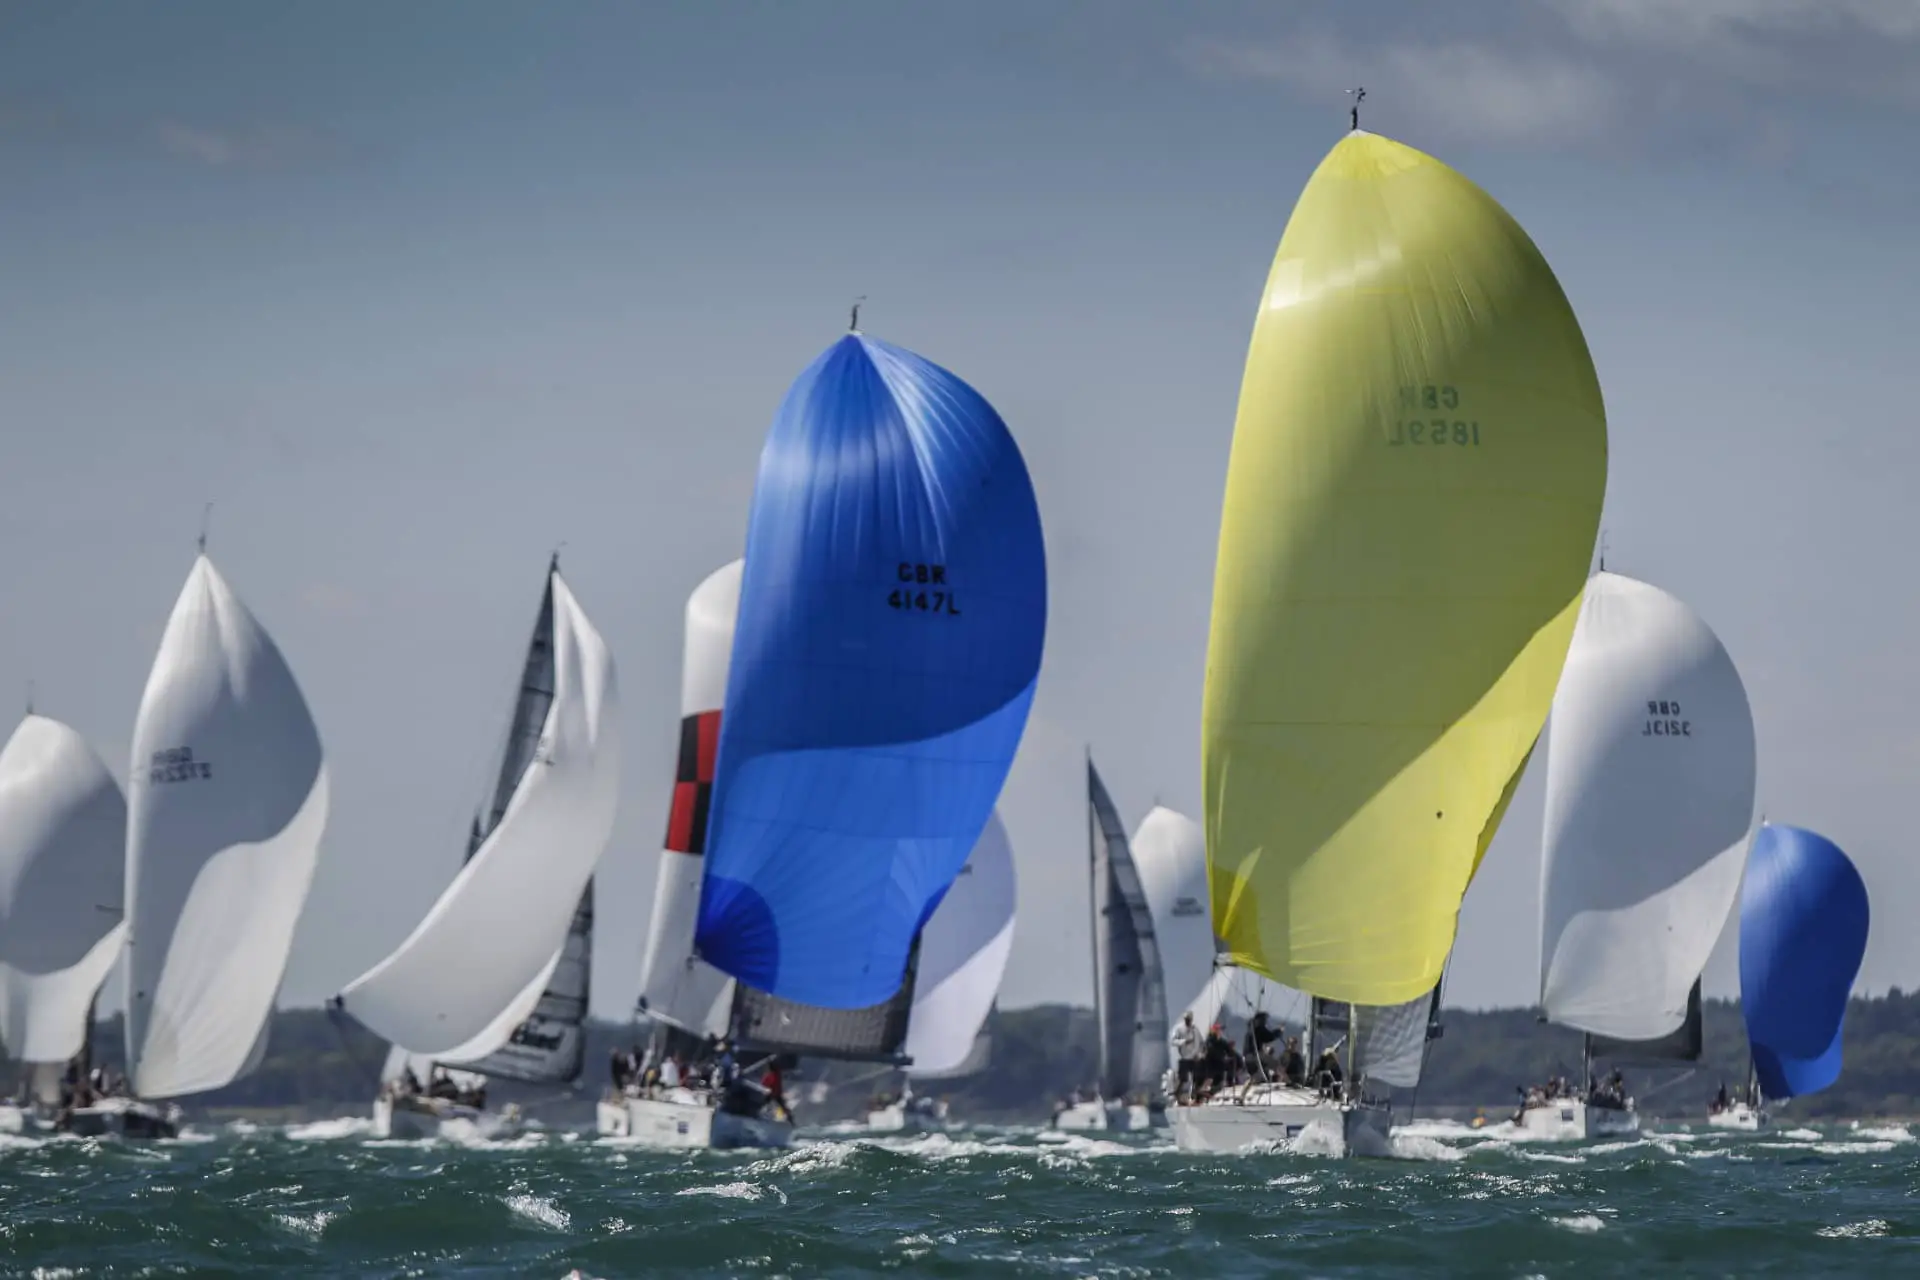 Boats racing on the water during Cowes Week